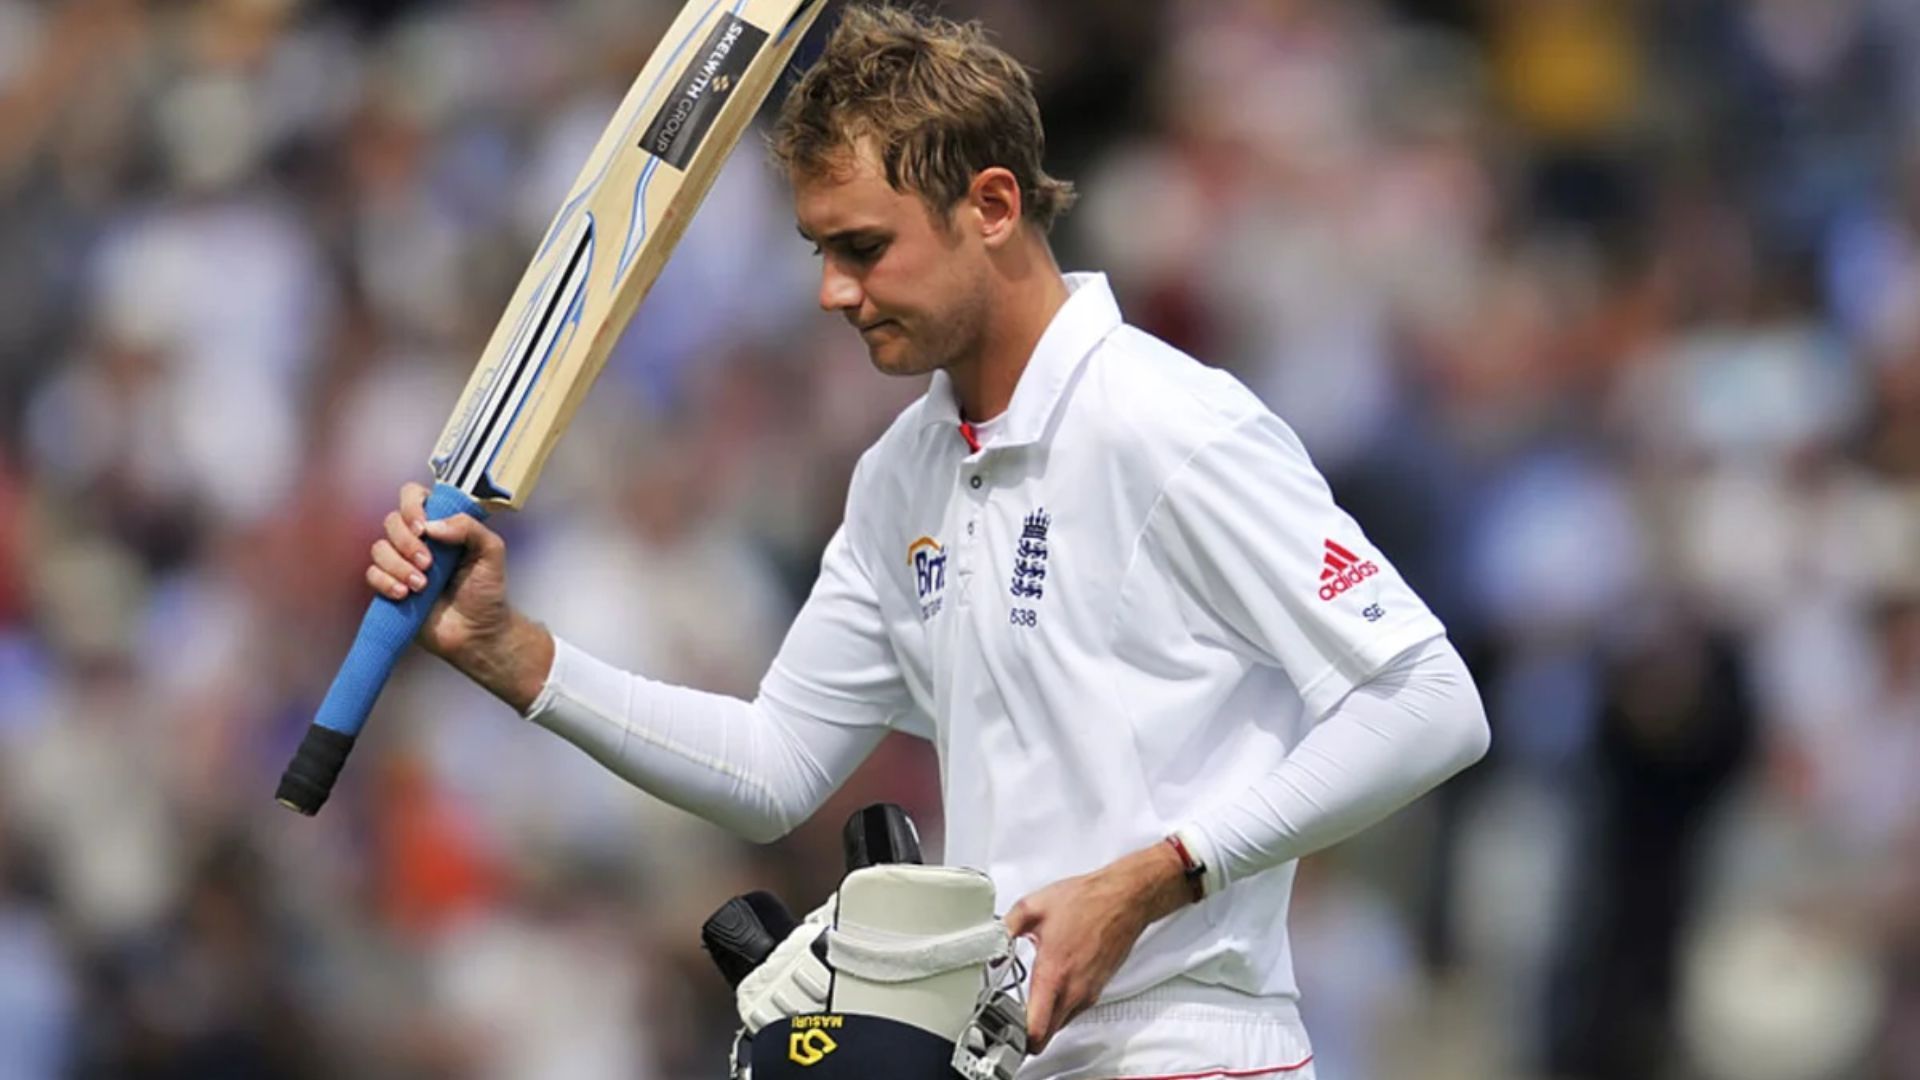 Stuart Broad etched his name into the record books and the Lord&#039;s Honours Board with that spectacular innings. (Image courtesy: espncricinfo.com)